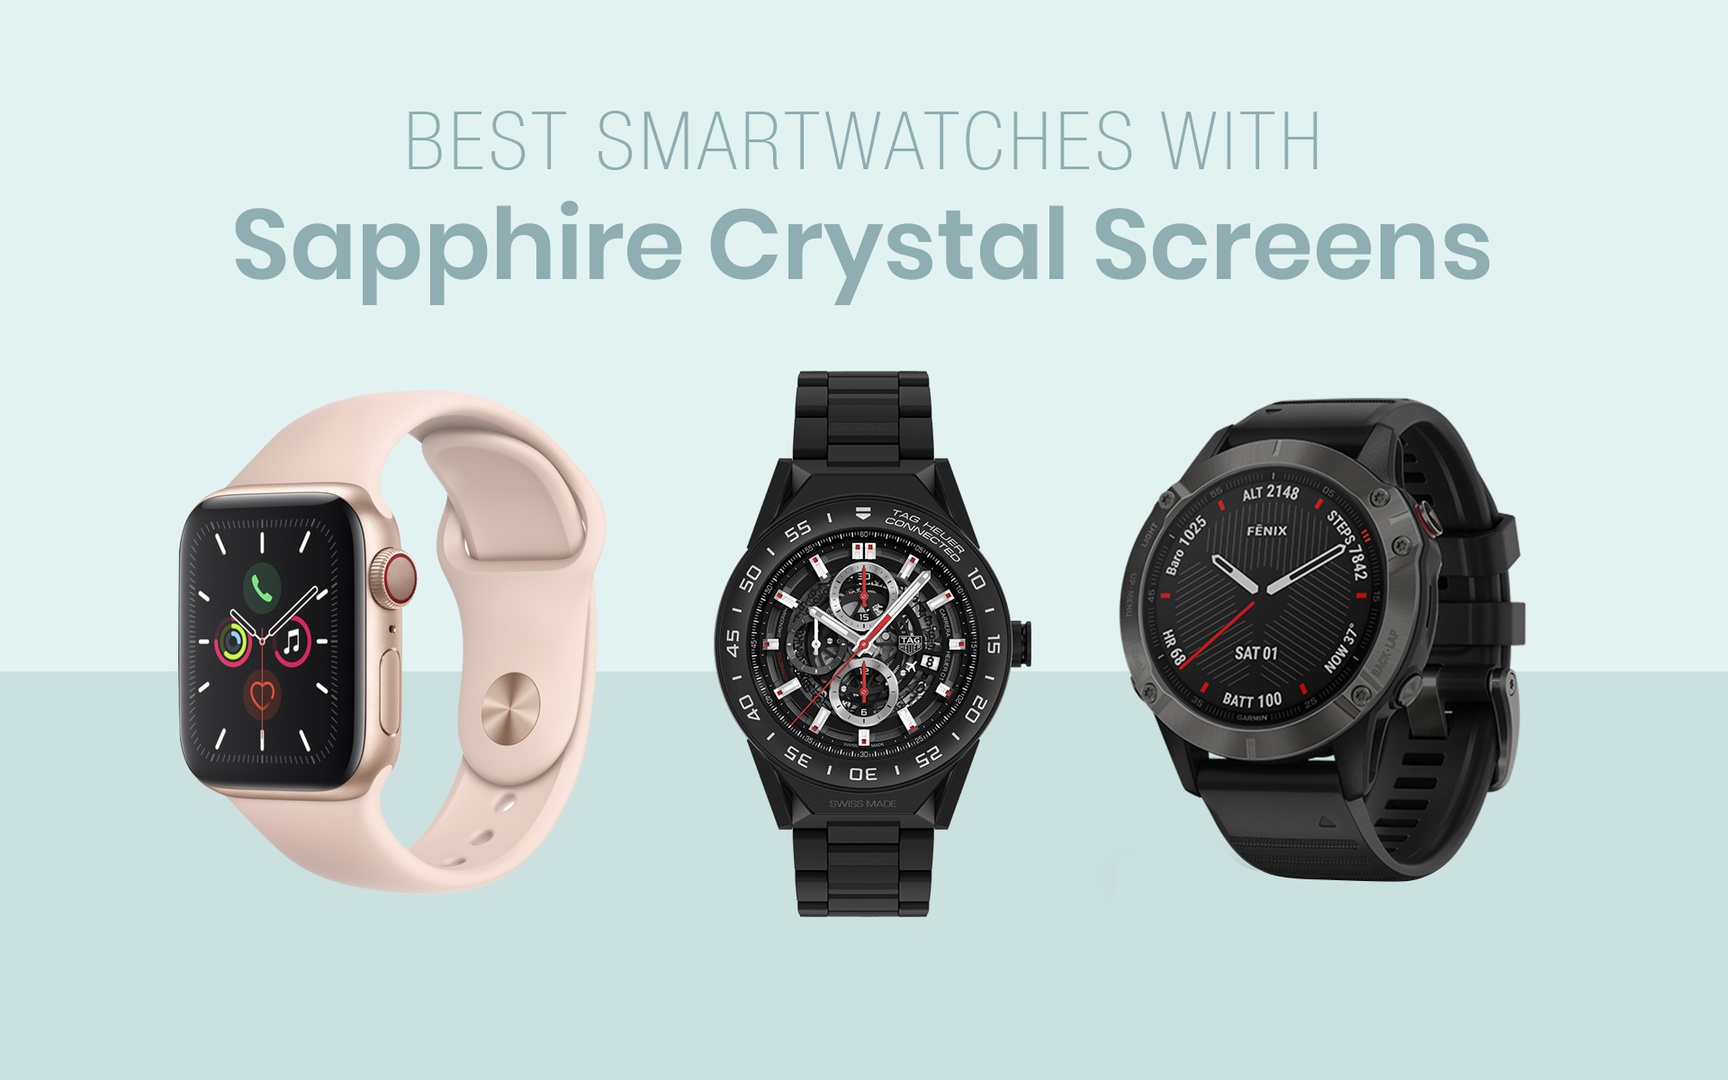 Best Smartwatches with Sapphire Crystal Screens